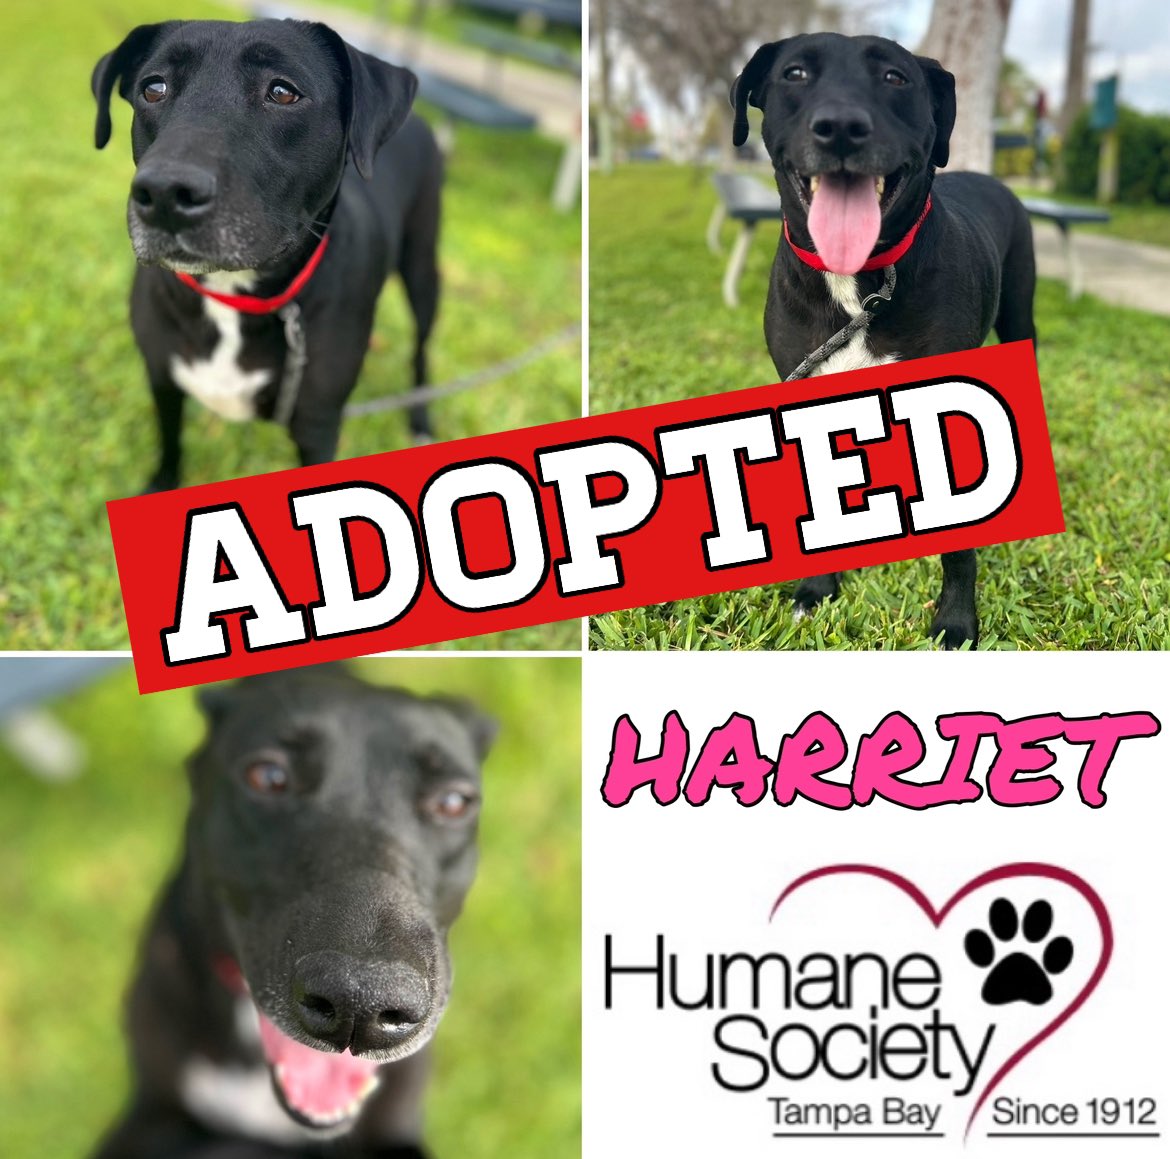 UPDATE / PUPDATE: Great News! HARRIET got ADOPTED! 😃 Congratulations to HARRIET and her new forever family! If you or anyone you know is looking for a BEST FRIEND please visit @HumaneTampaBay #adoptdontshop🐾